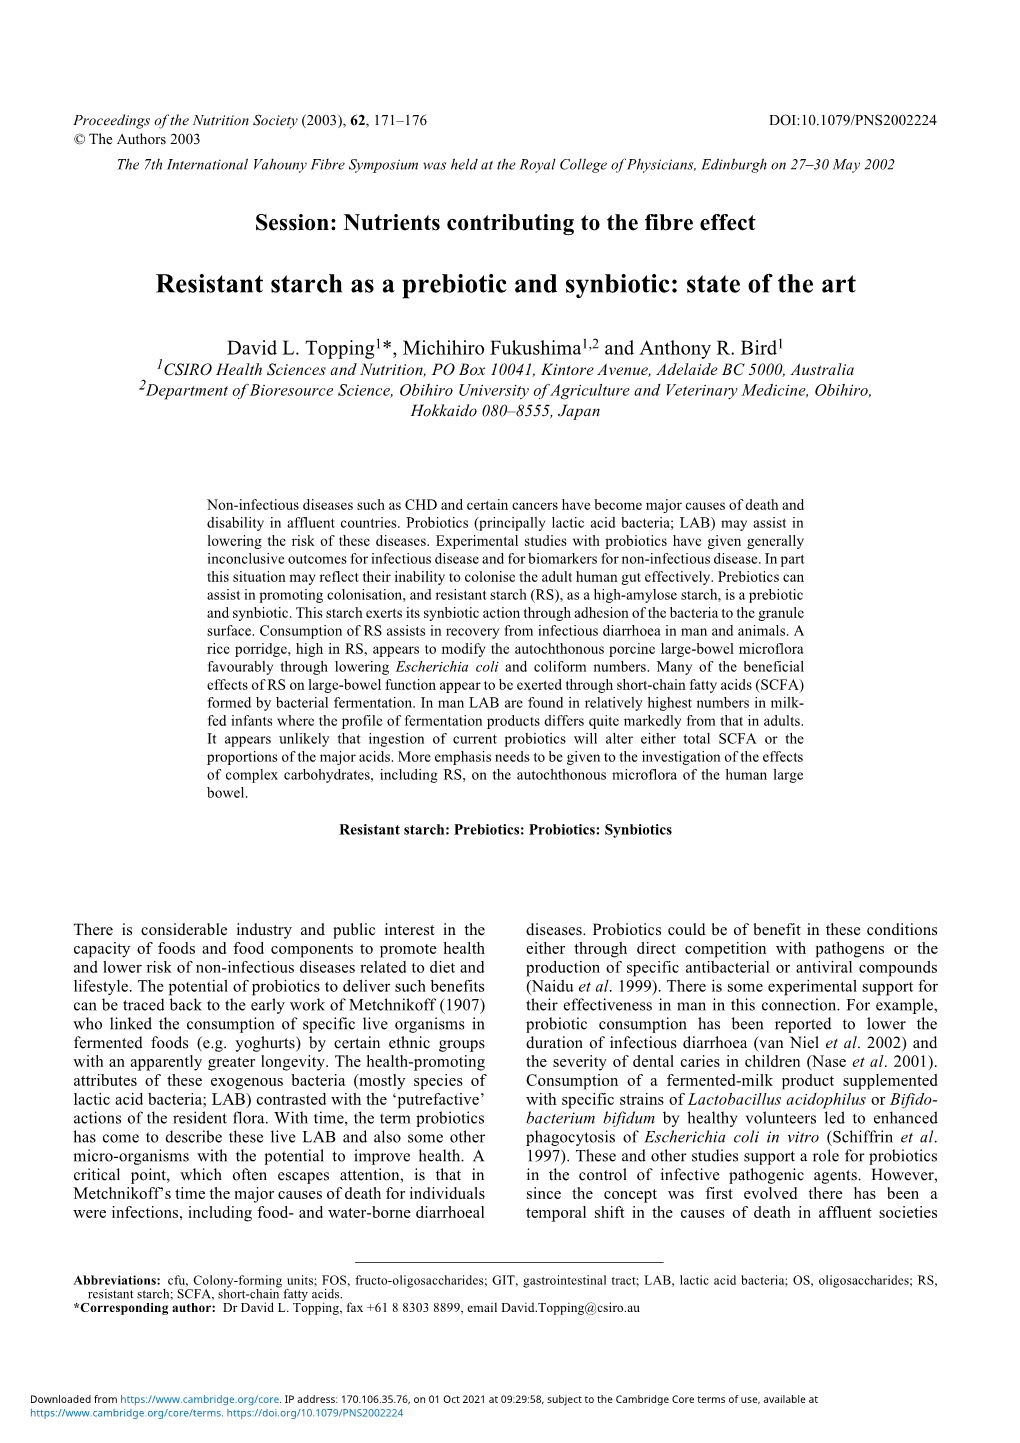 Resistant Starch As a Prebiotic and Synbiotic Clifton, 2001)